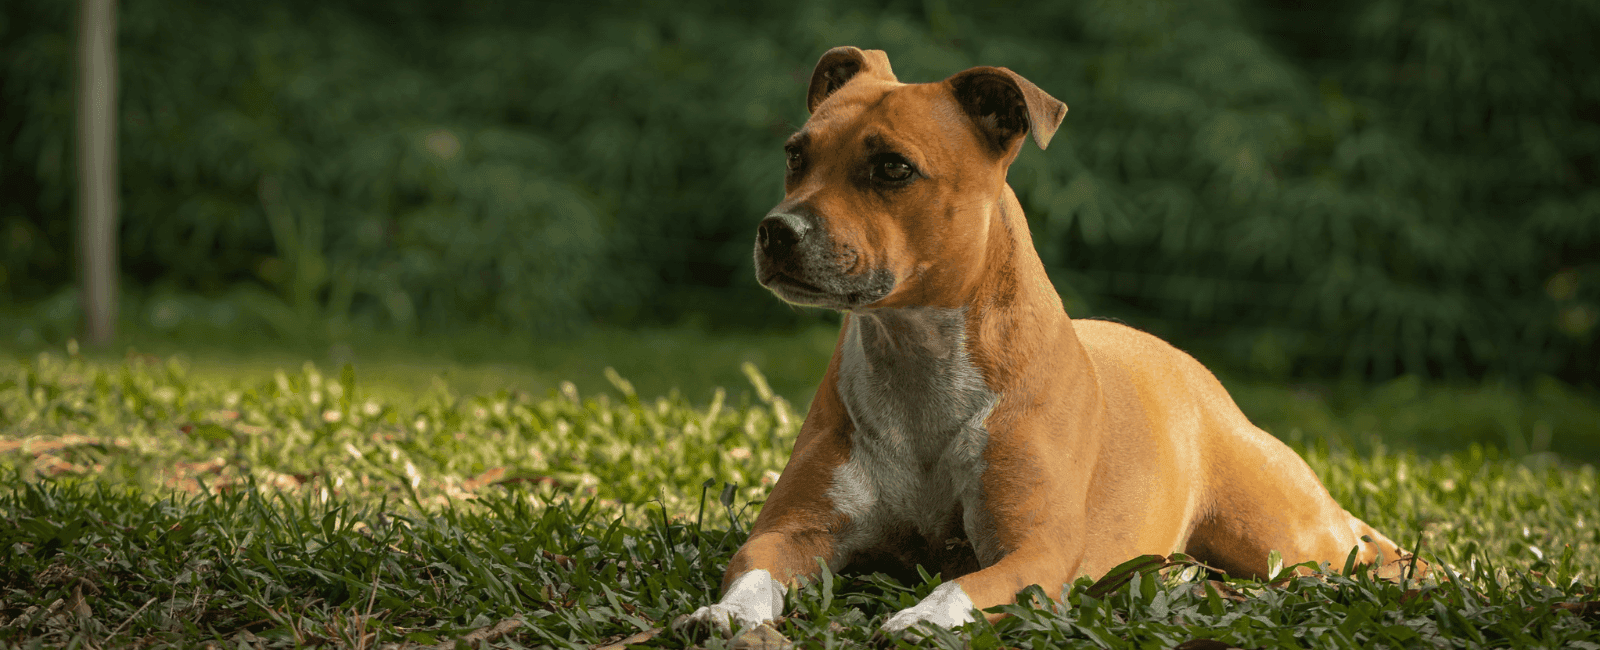 Battling Canine Cancer: How Medicinal Mushrooms Can Help Your Dog's Recovery